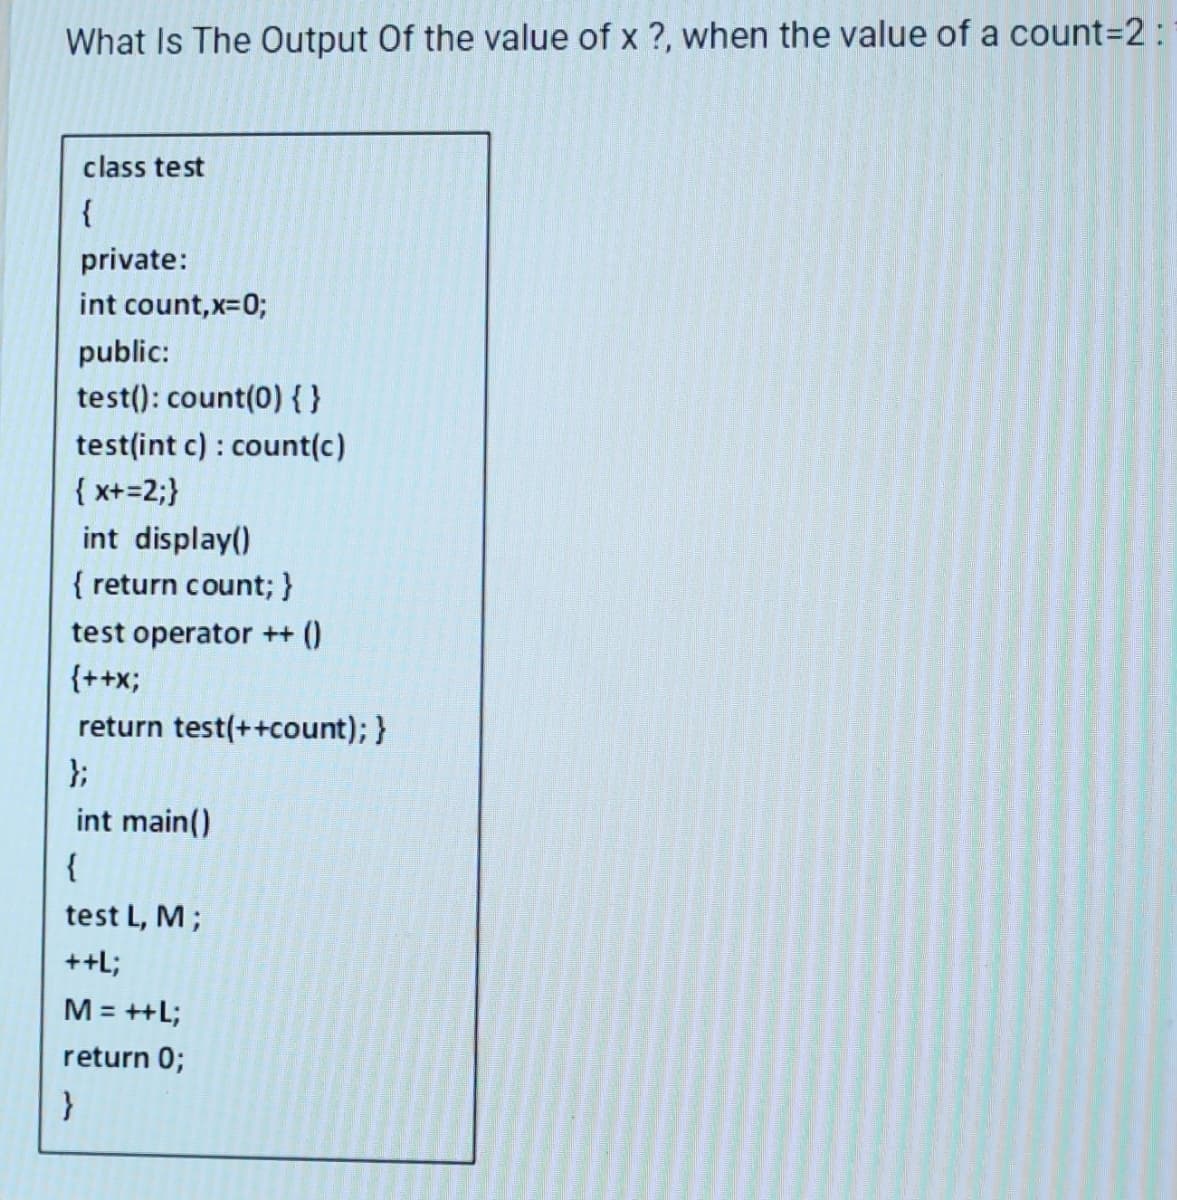 What Is The Output Of the value of x ?, when the value of a count=2:
class test
{
private:
int count,x=0;
public:
test(): count(0) { }
test(int c): count(c)
{ x+=2;}
int display()
{ return count; }
test operator ++ ()
{++X;
return test(++count); }
};
int main()
{
test L, M ;
++L;
M = ++L;
return 0;
}